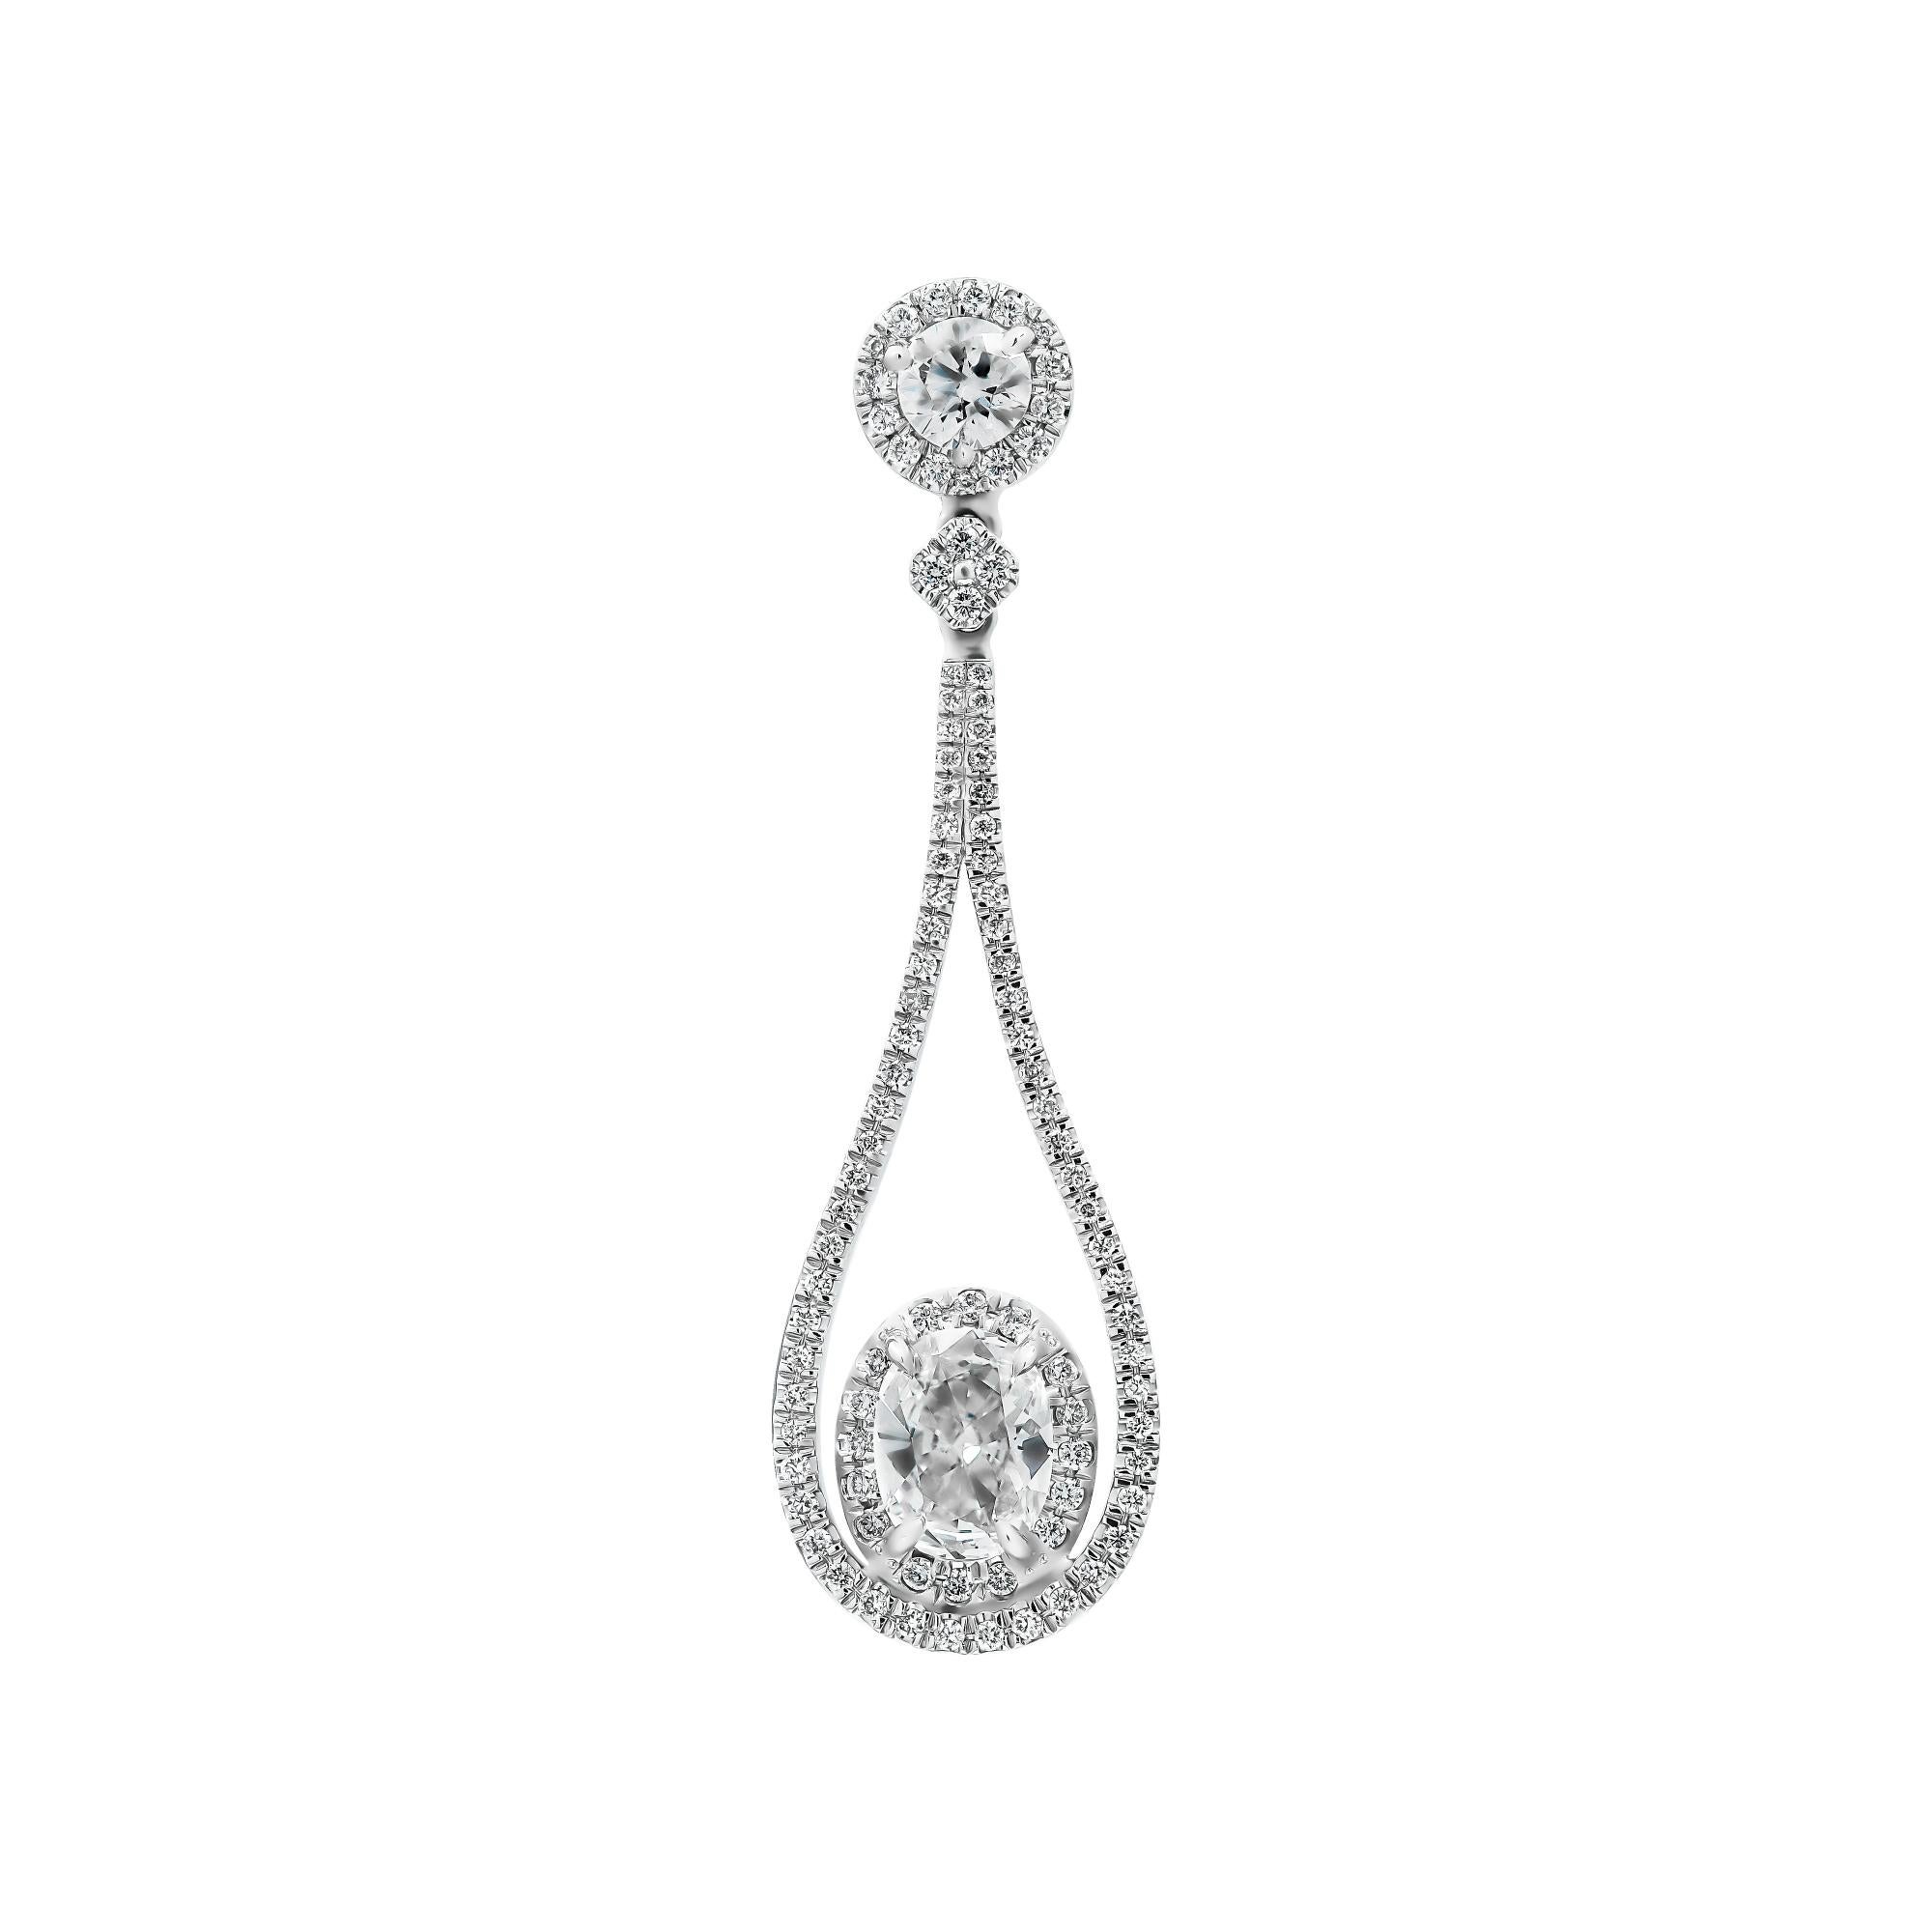 Drop Earrings in 18K White gold with oval diamonds that won't miss a sparkle!
Elegant and timeless, prefect for a wedding, black tie event or if you just a diamond lover like us, you can wear it every day!
Featuring excepcional pave work, Round